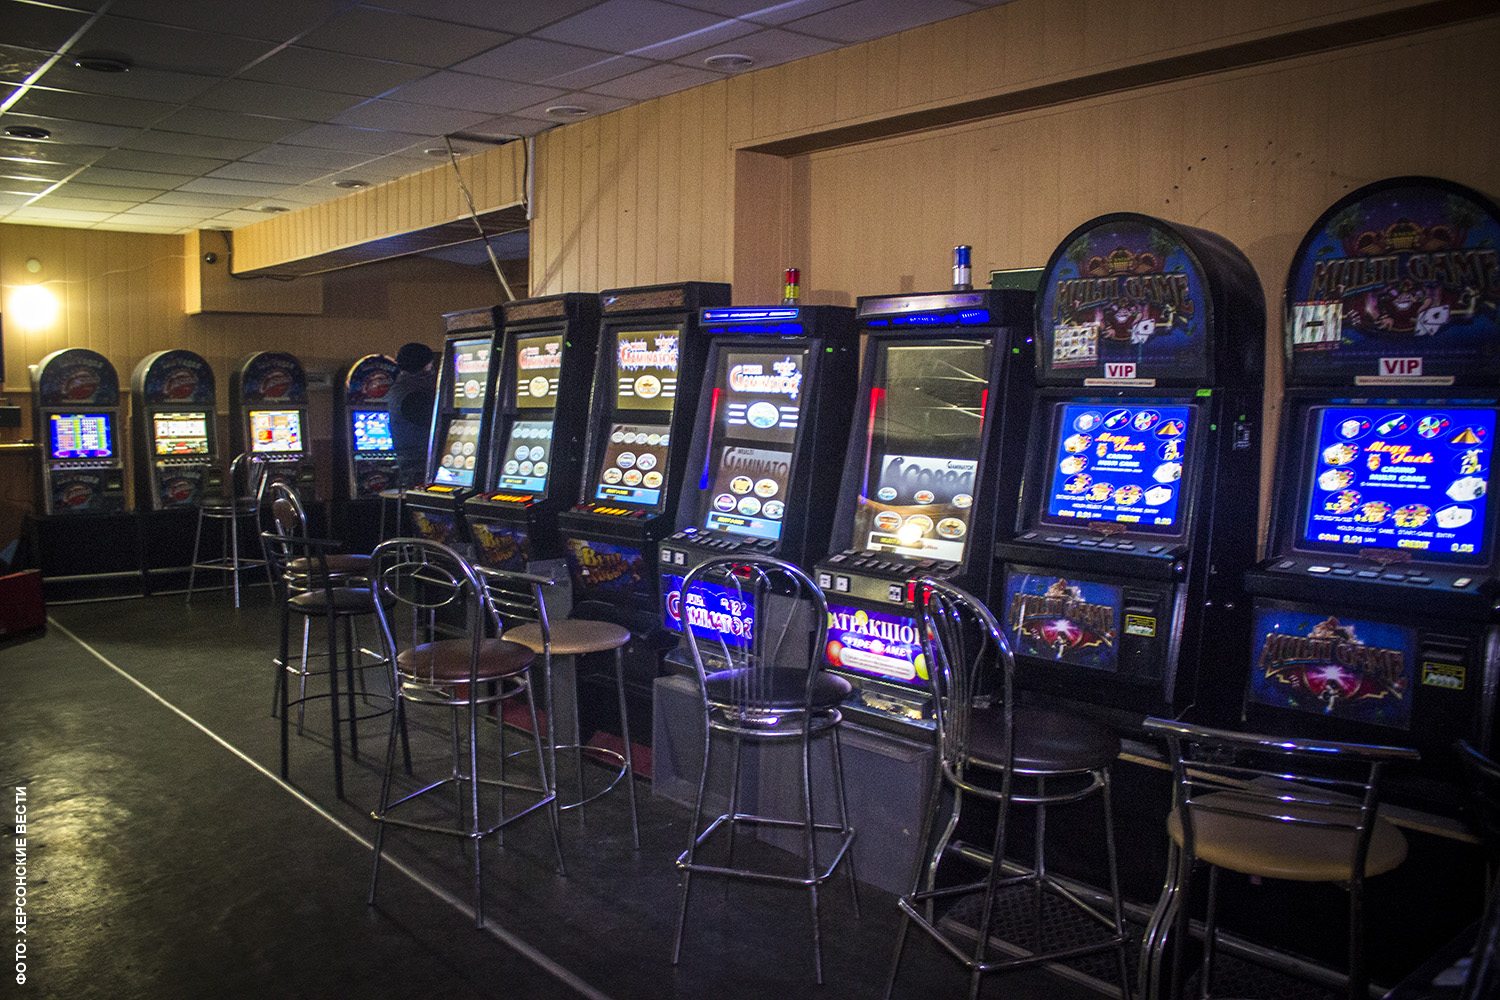 Slot machines and their technical indicators: the basic rules of the game